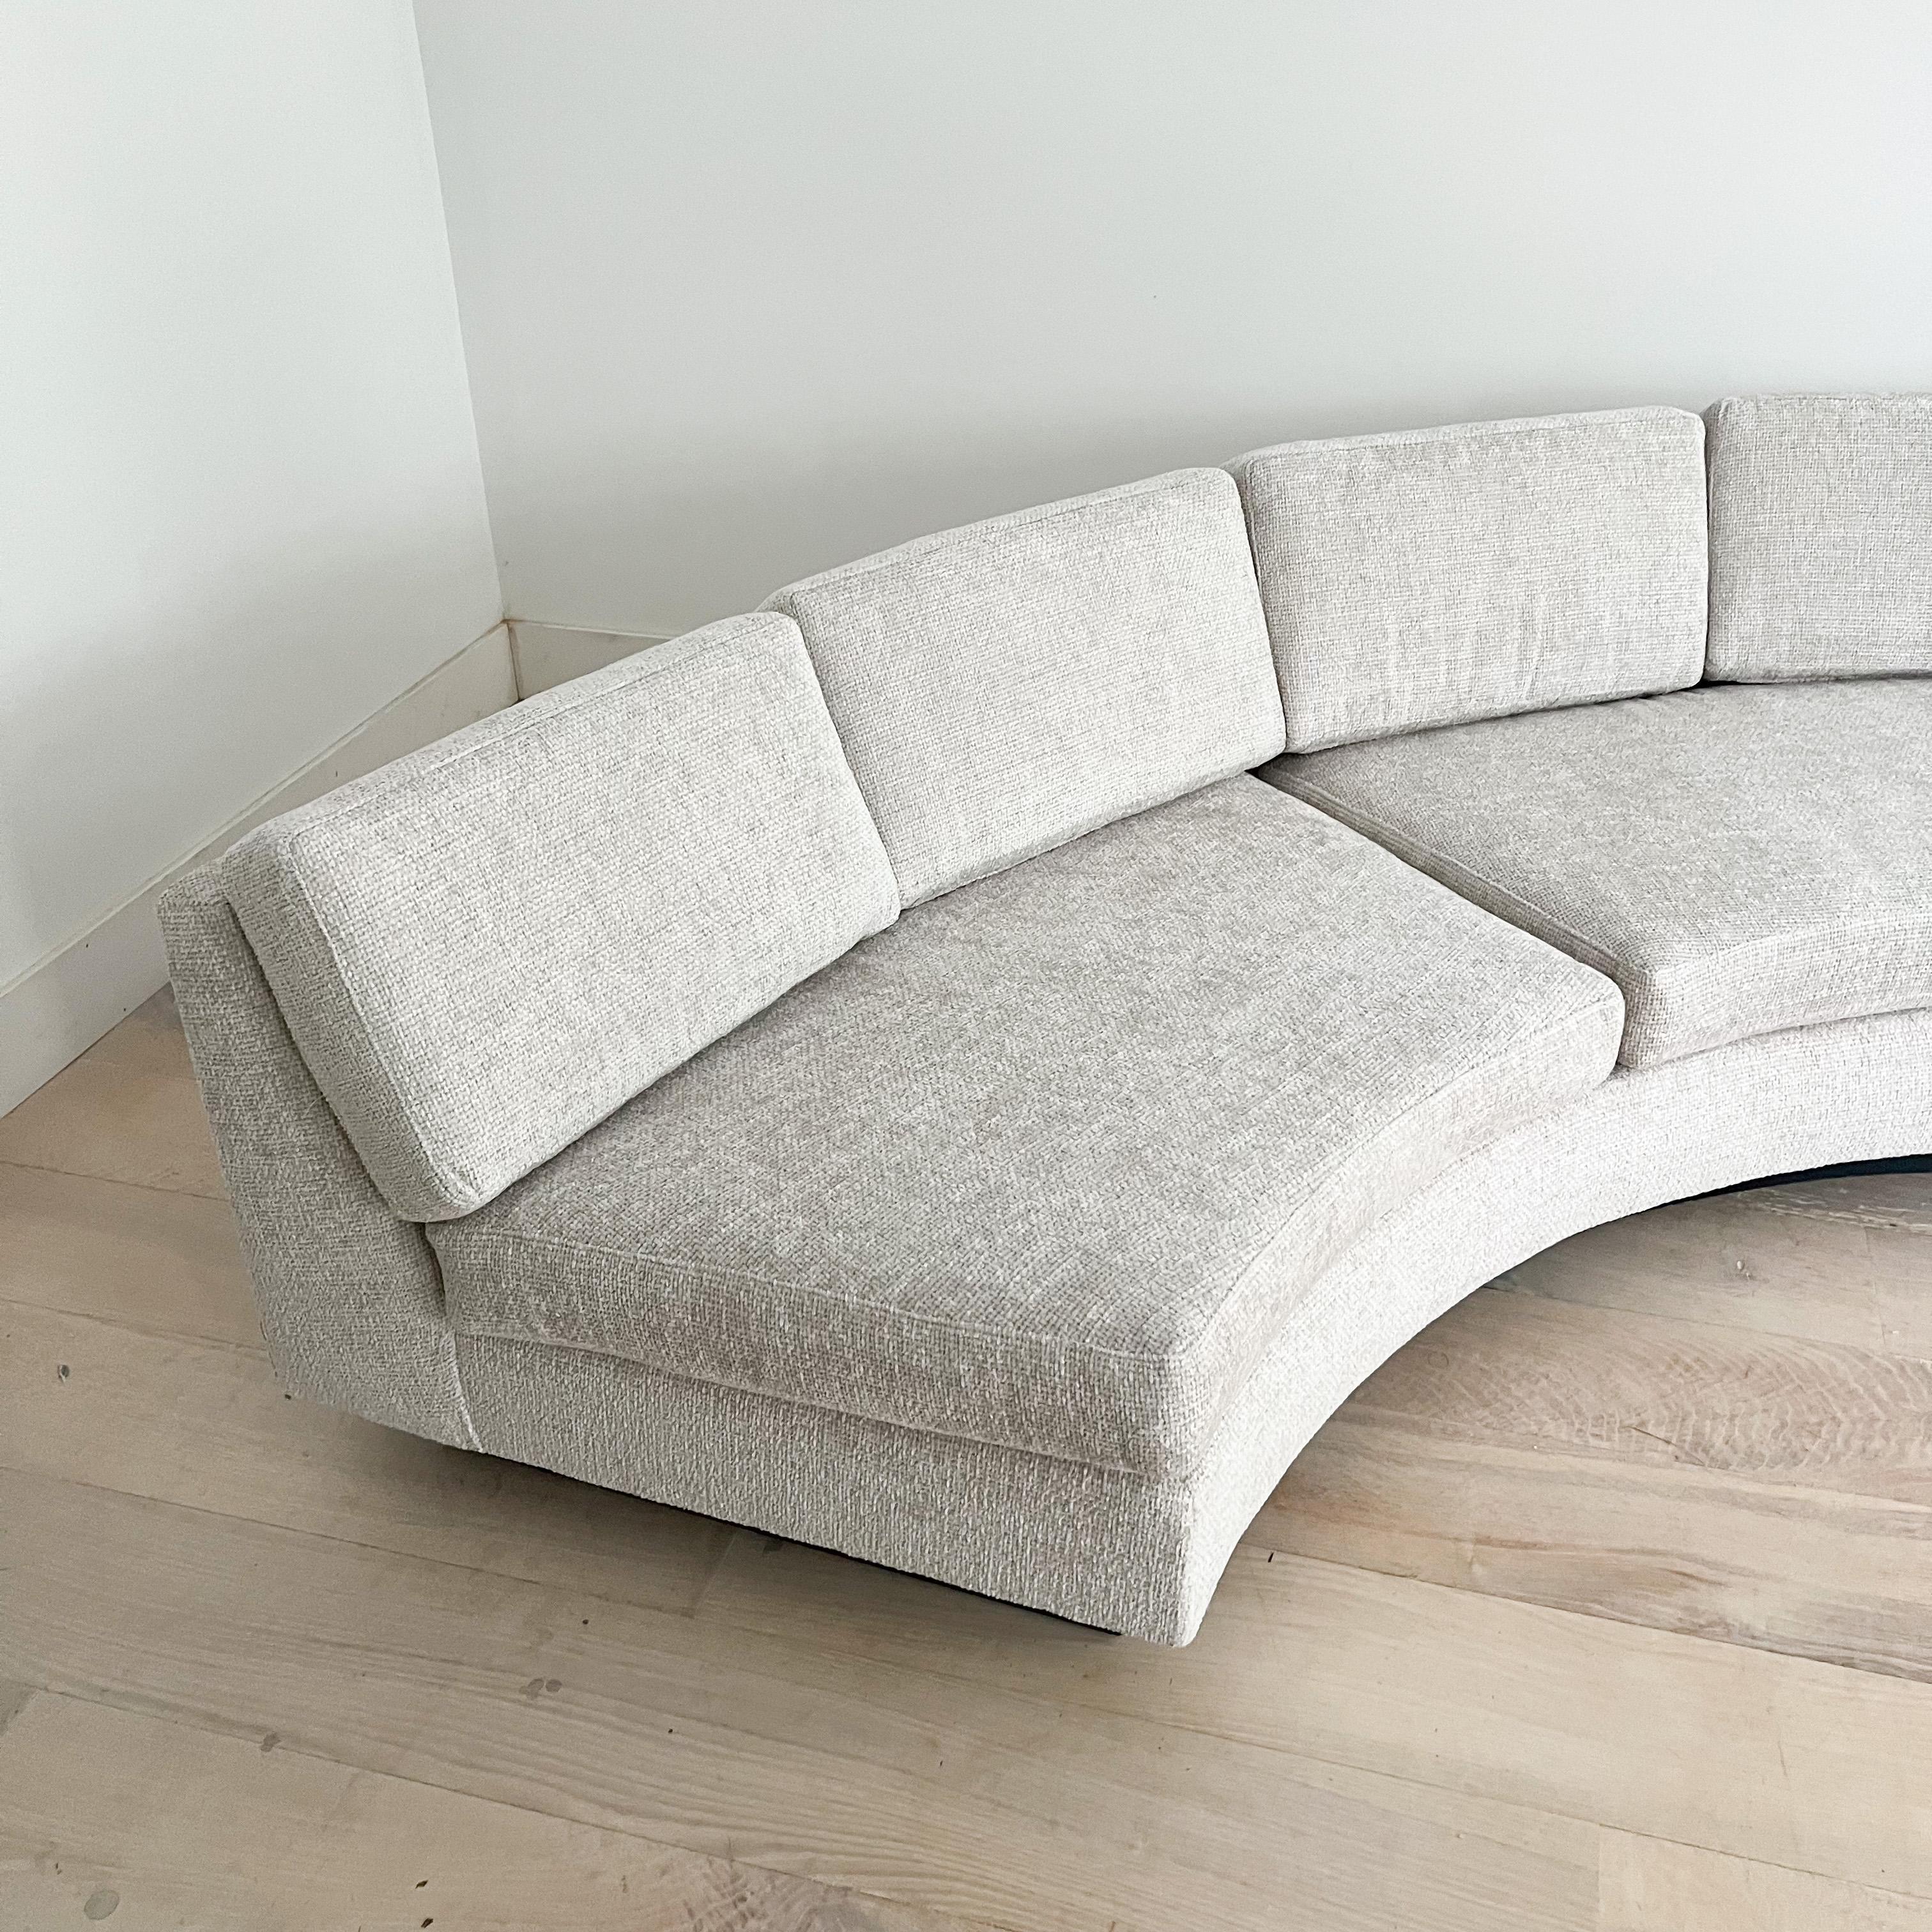 Elevate your interior with this exquisite mid-century modern two-part semi-circle sectional sofa. Meticulously restored, this statement piece boasts a blend of form and function that will transform your living space.

Featuring brand-new foam